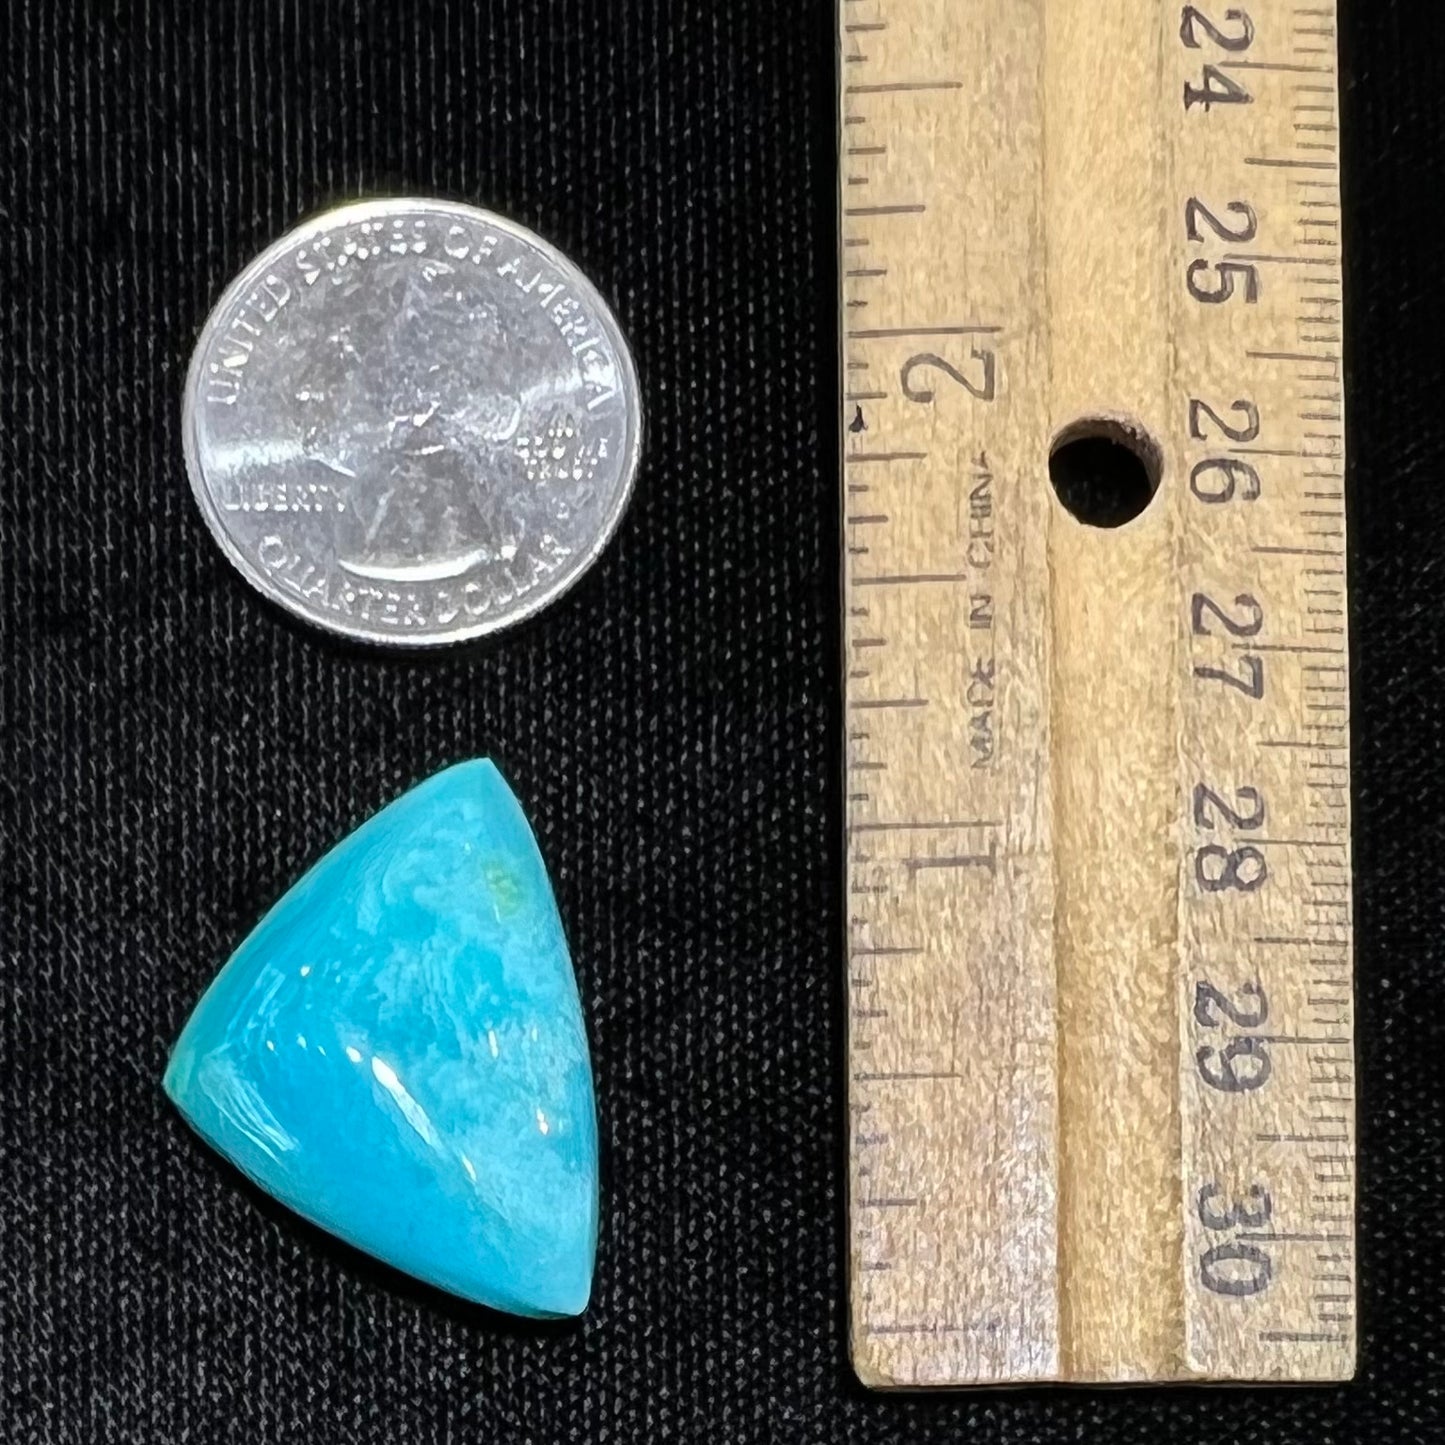 A loose triangular cabochon cut blue turquoise stone from the Sleeping Beauty Mine in Arizona.